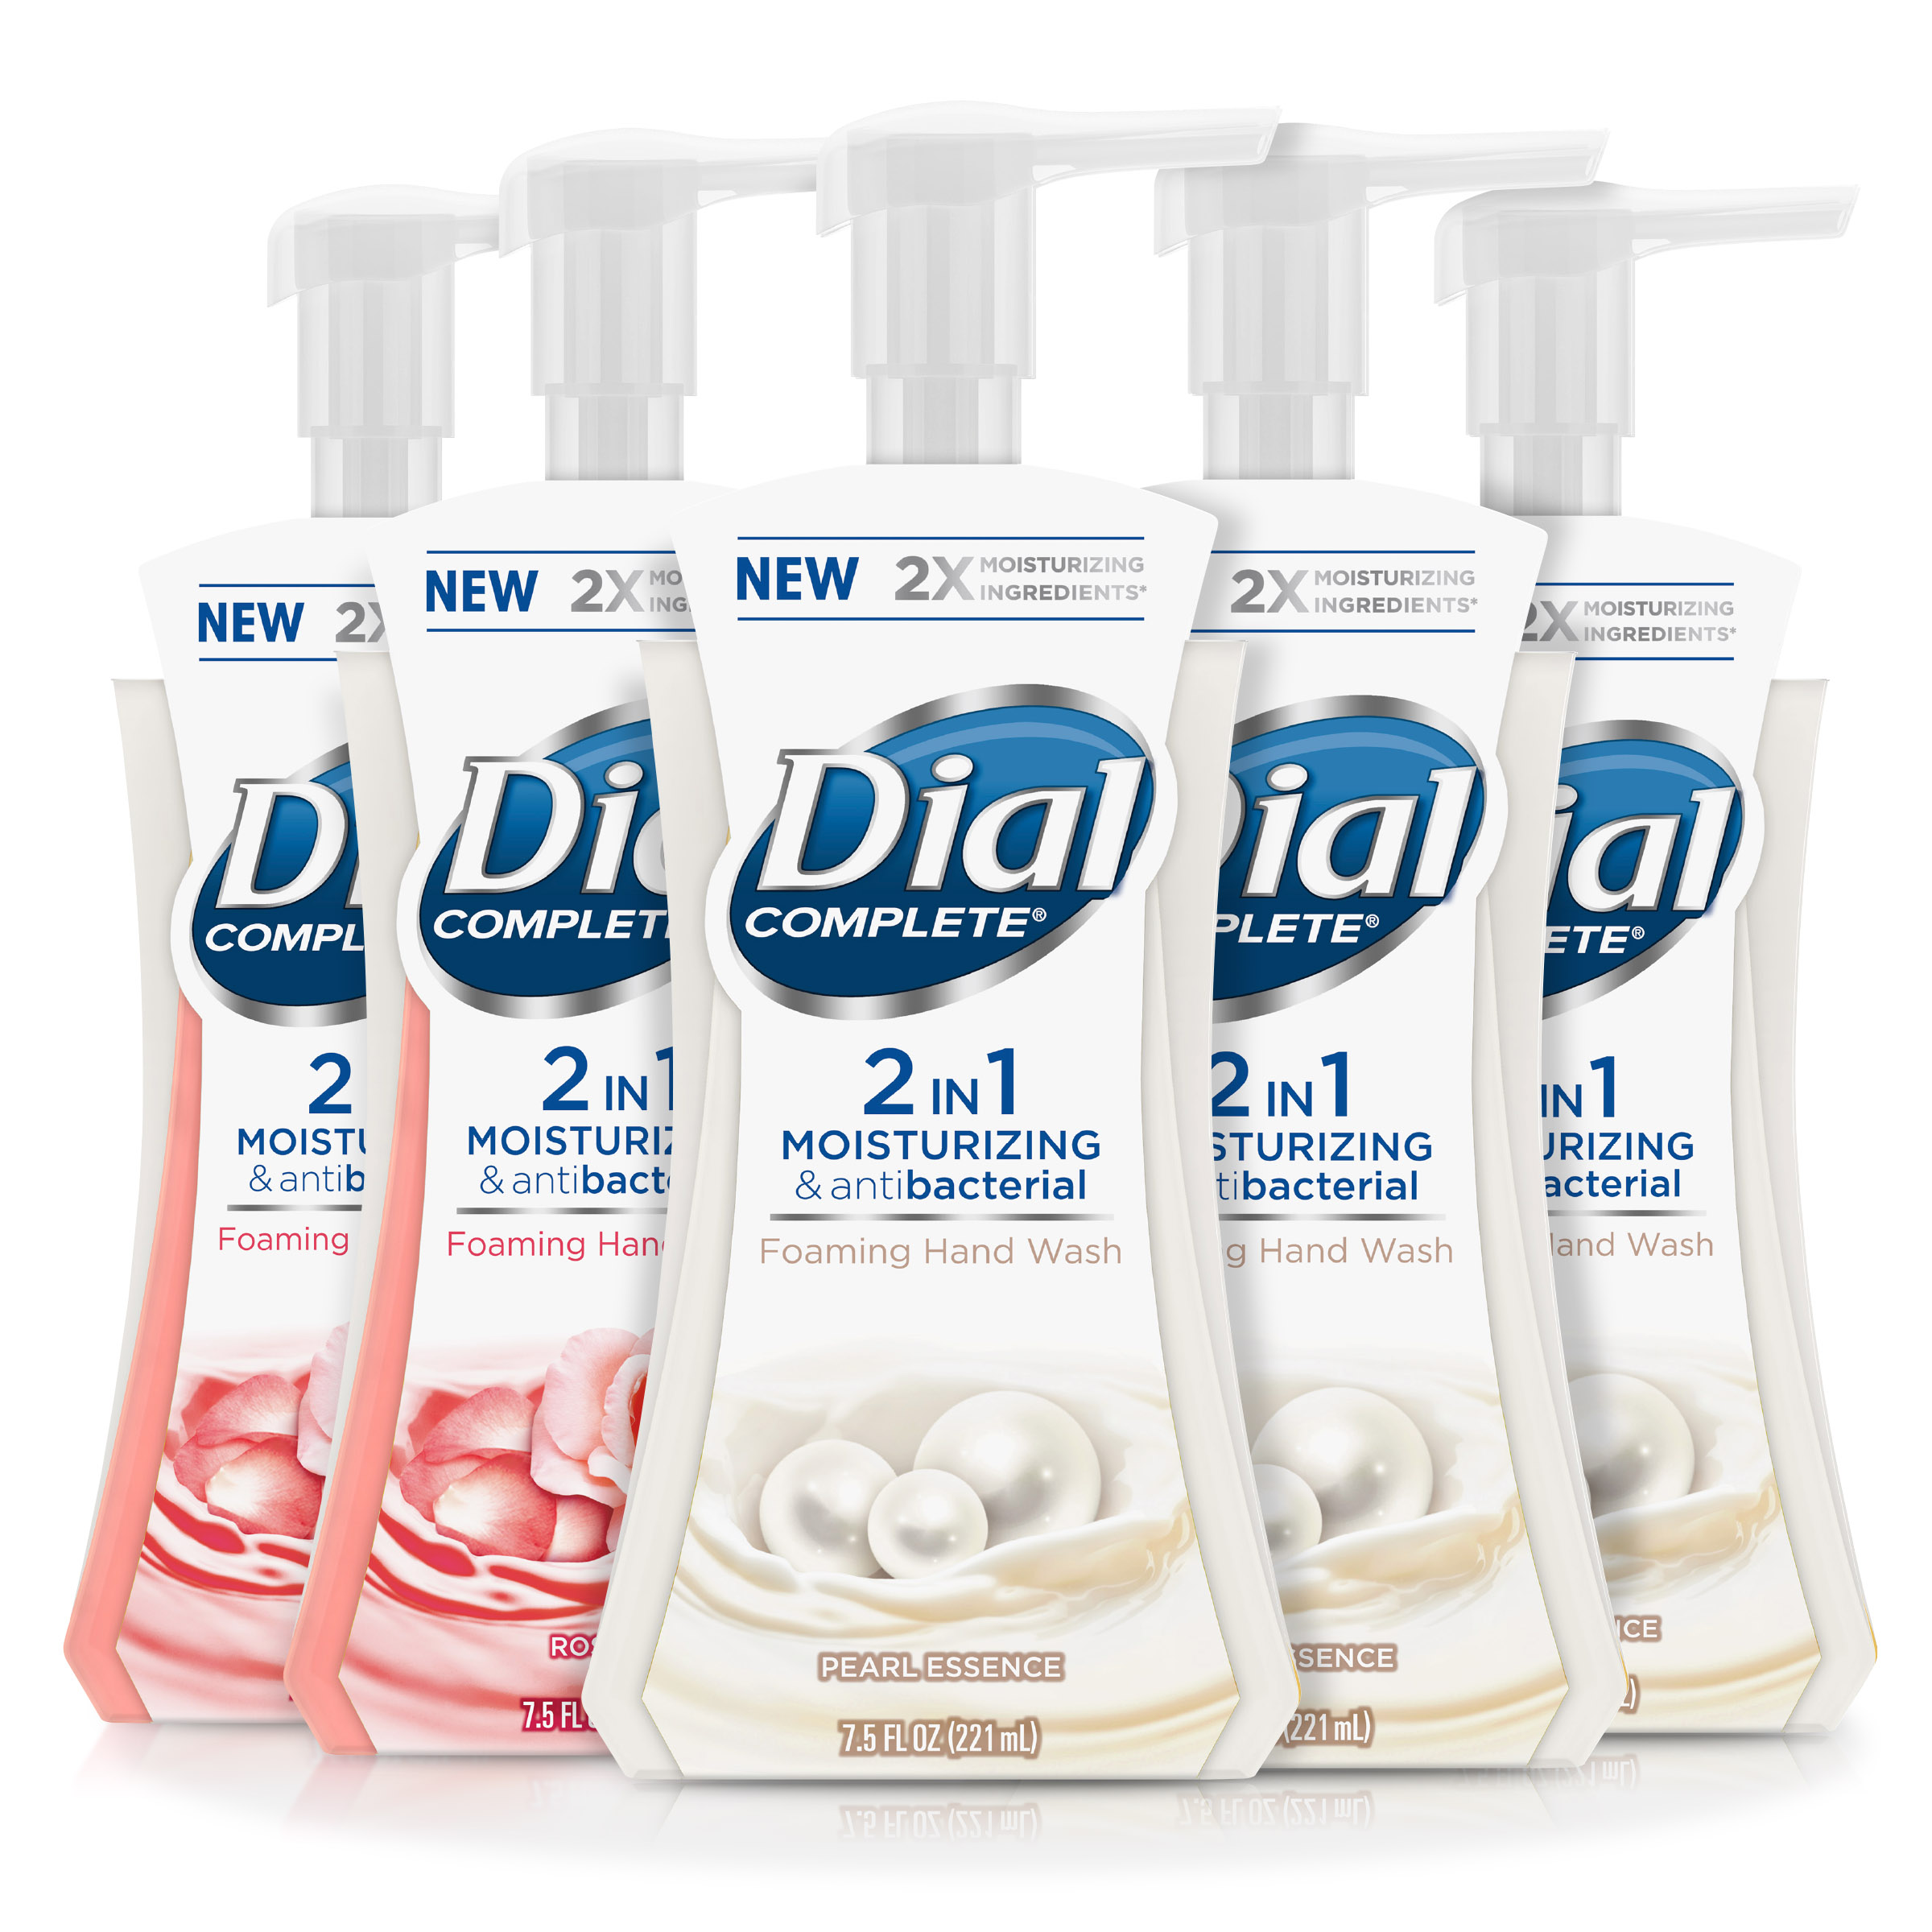 Dial Complete 2 in 1 Foaming Hand Wash, Assorted Varieties, 7.5 Ounce (5 Count) - image 1 of 7